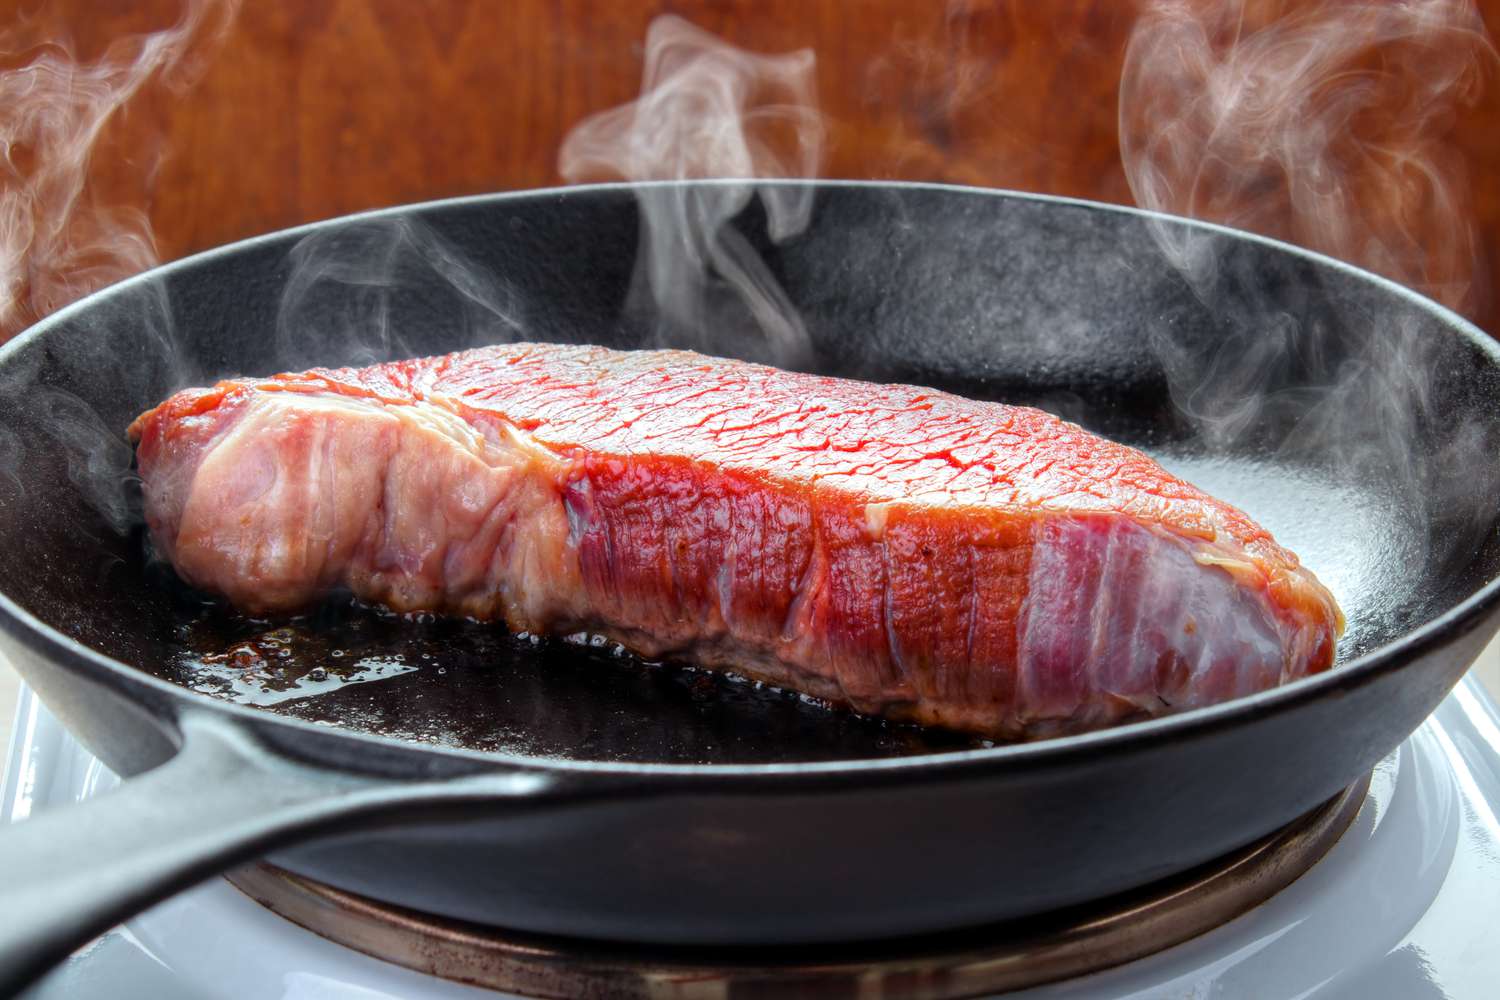 Can You Cook Steak on a Non Stick Pan?